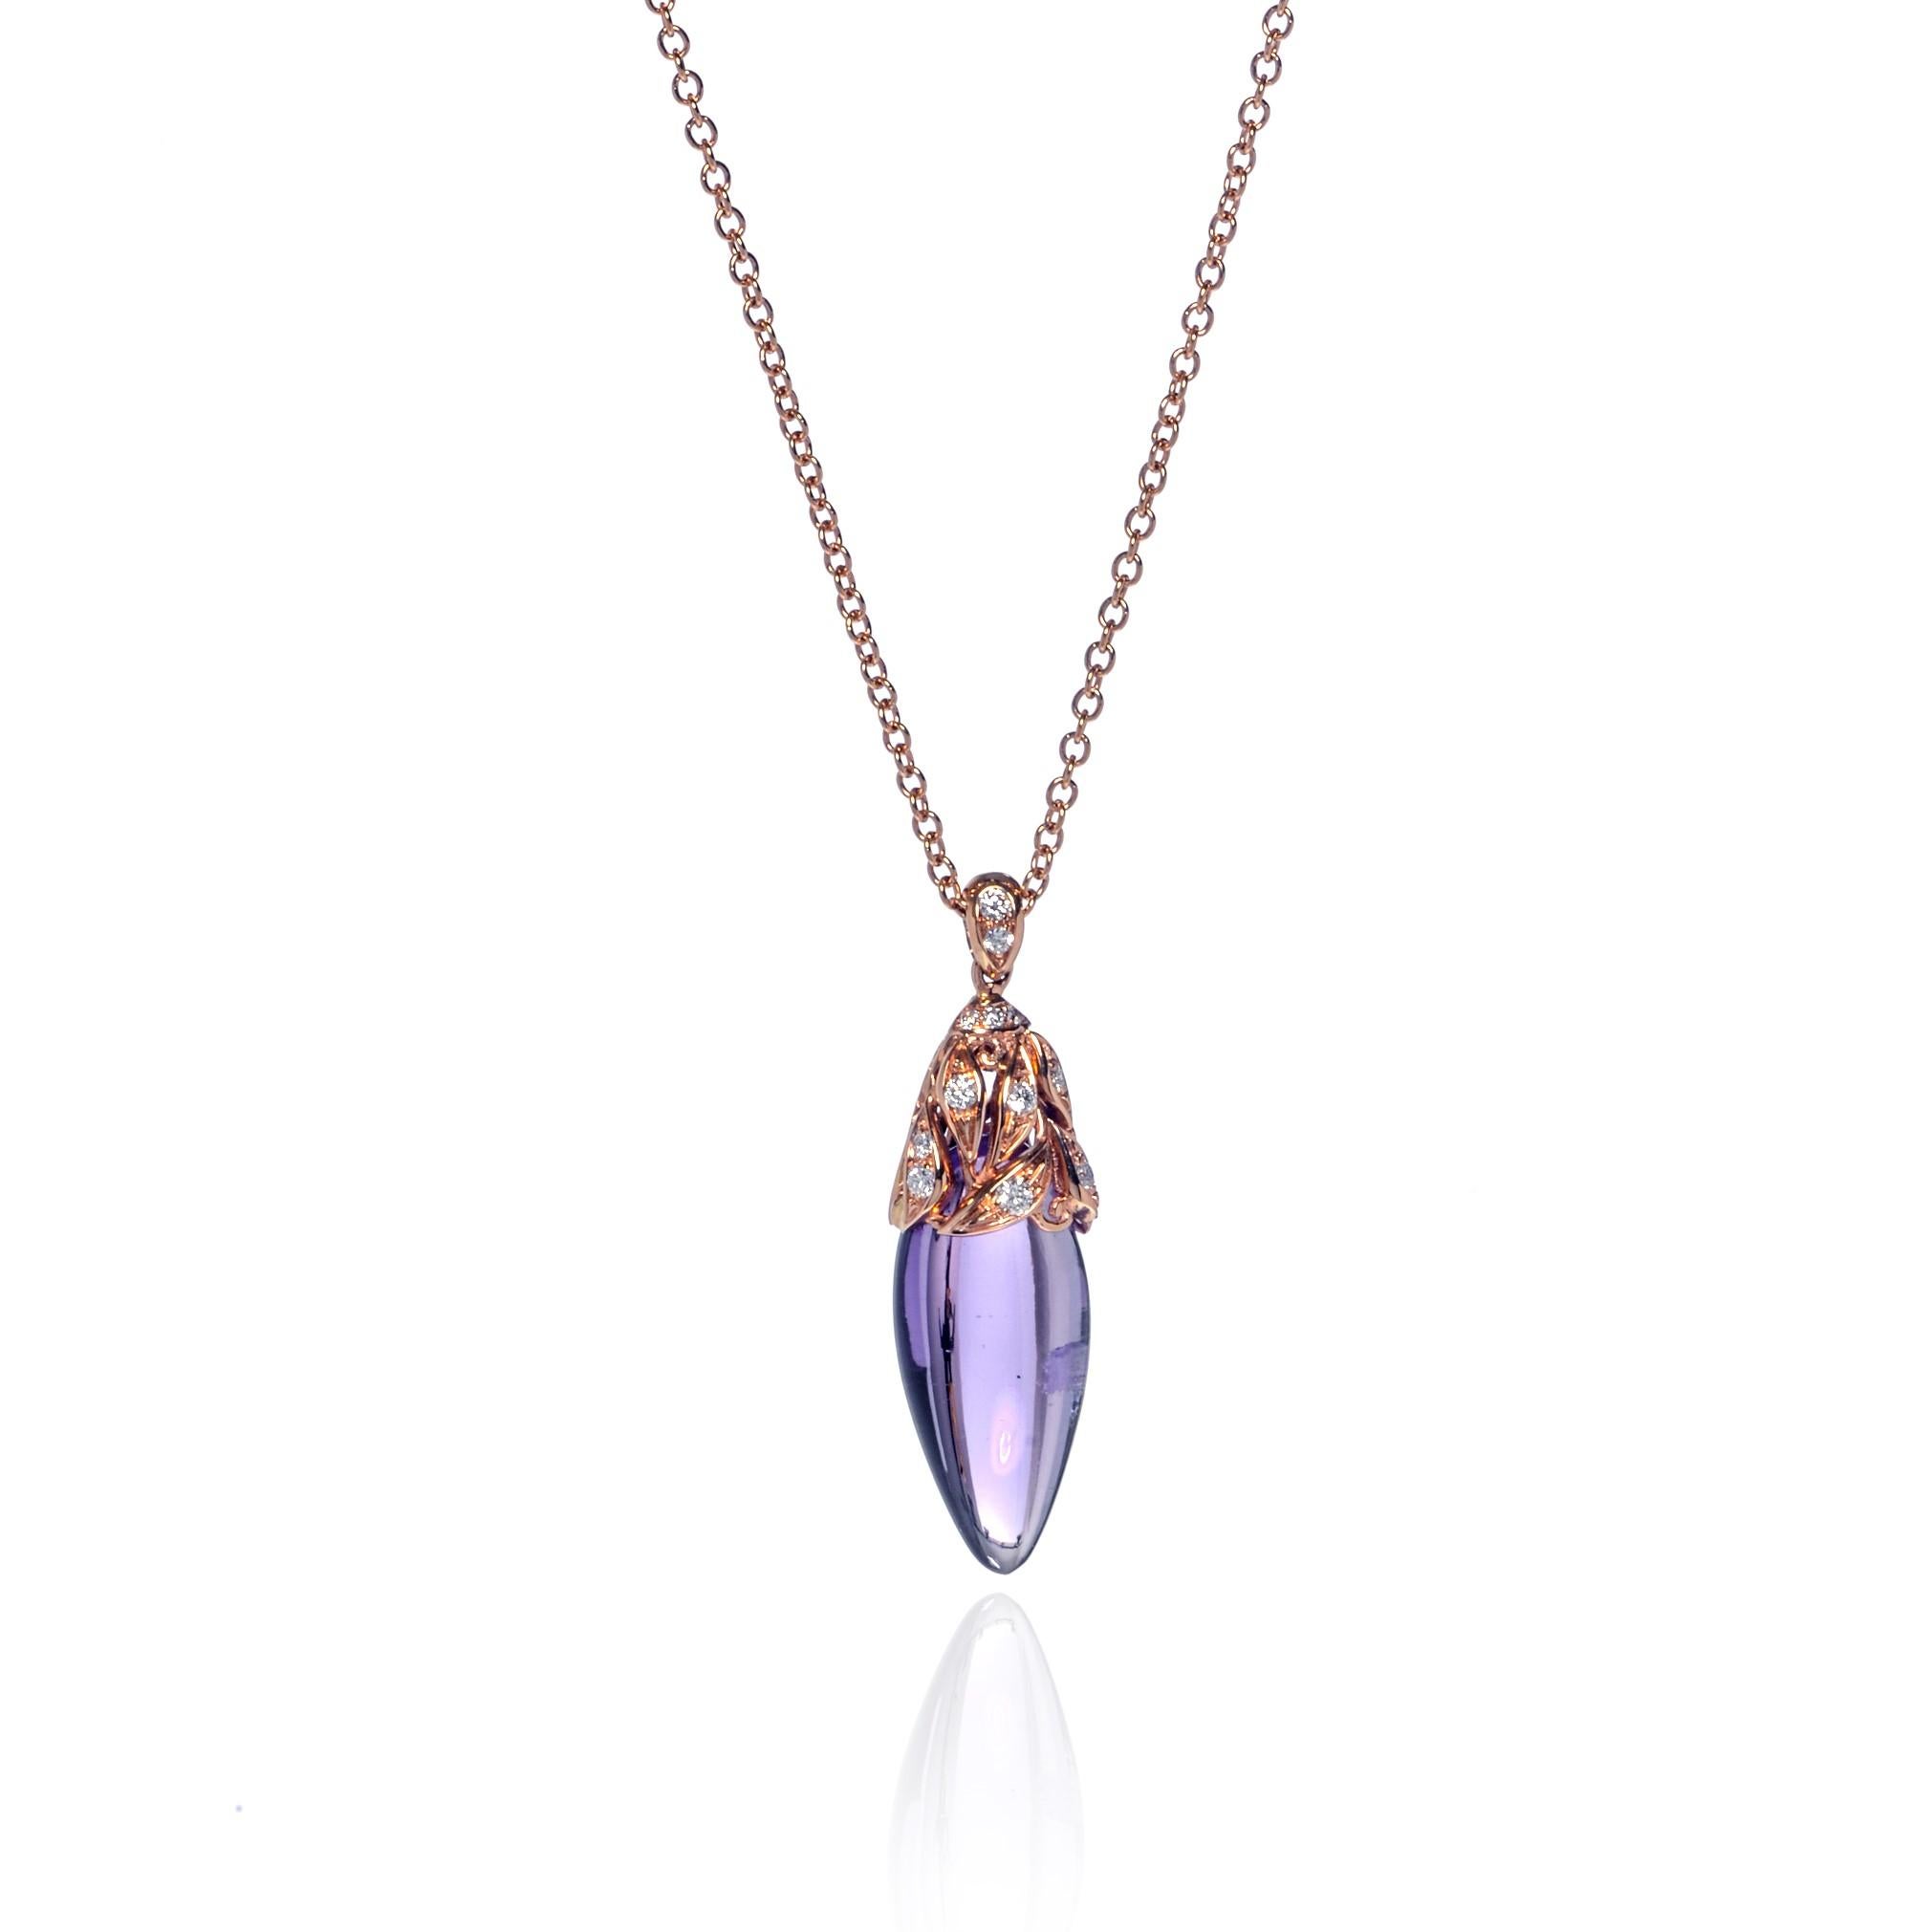 A beautiful purple Amethyst and diamond pendant necklace from Luca Carati. Amethyst weight: 10.72cts. Total diamond weight: 0.17cts. Diamond quality: G color and VVS clarity. Chain length: 17 inches. Comes with a box and certificate. 